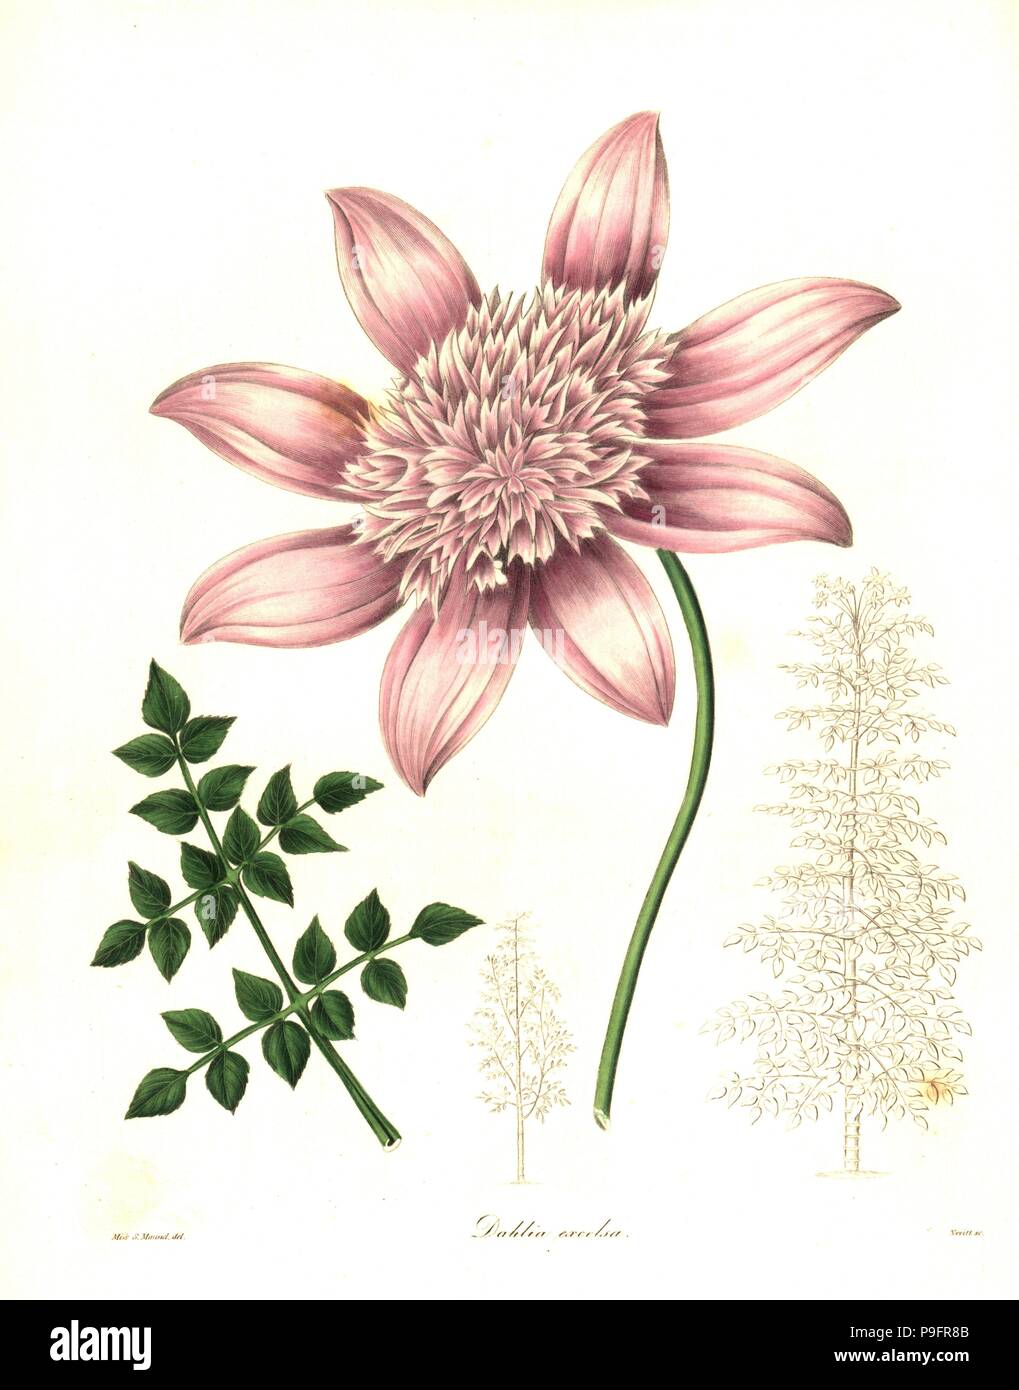 Tree dahlia, Dahlia excelsa. Handcoloured copperplate engraving by S. Nevitt after a botanical illustration by Miss Sara Maund from Benjamin Maund and the Rev. John Stevens Henslow's The Botanist, London, 1836. Stock Photo